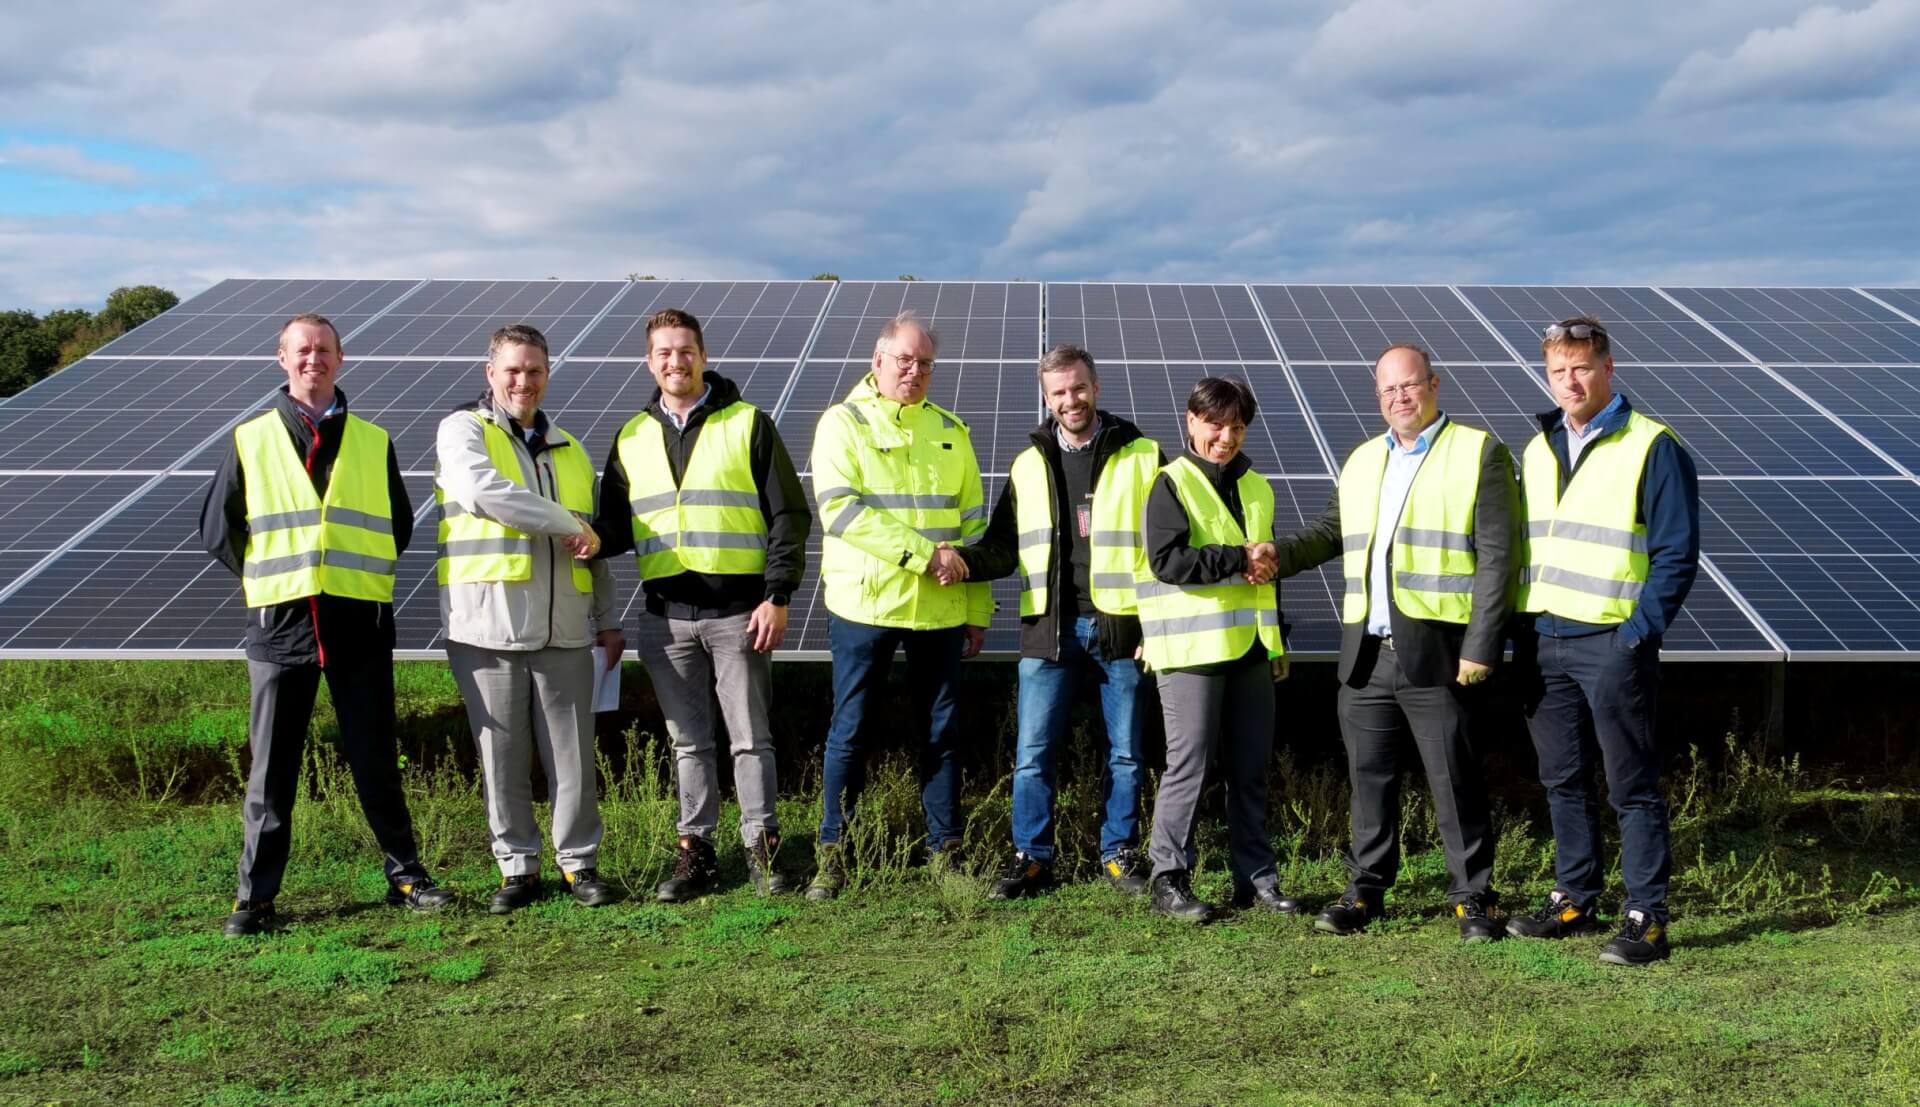 Employees of BELECTRIC and Low Carbon perform handshakes on a solar power plant